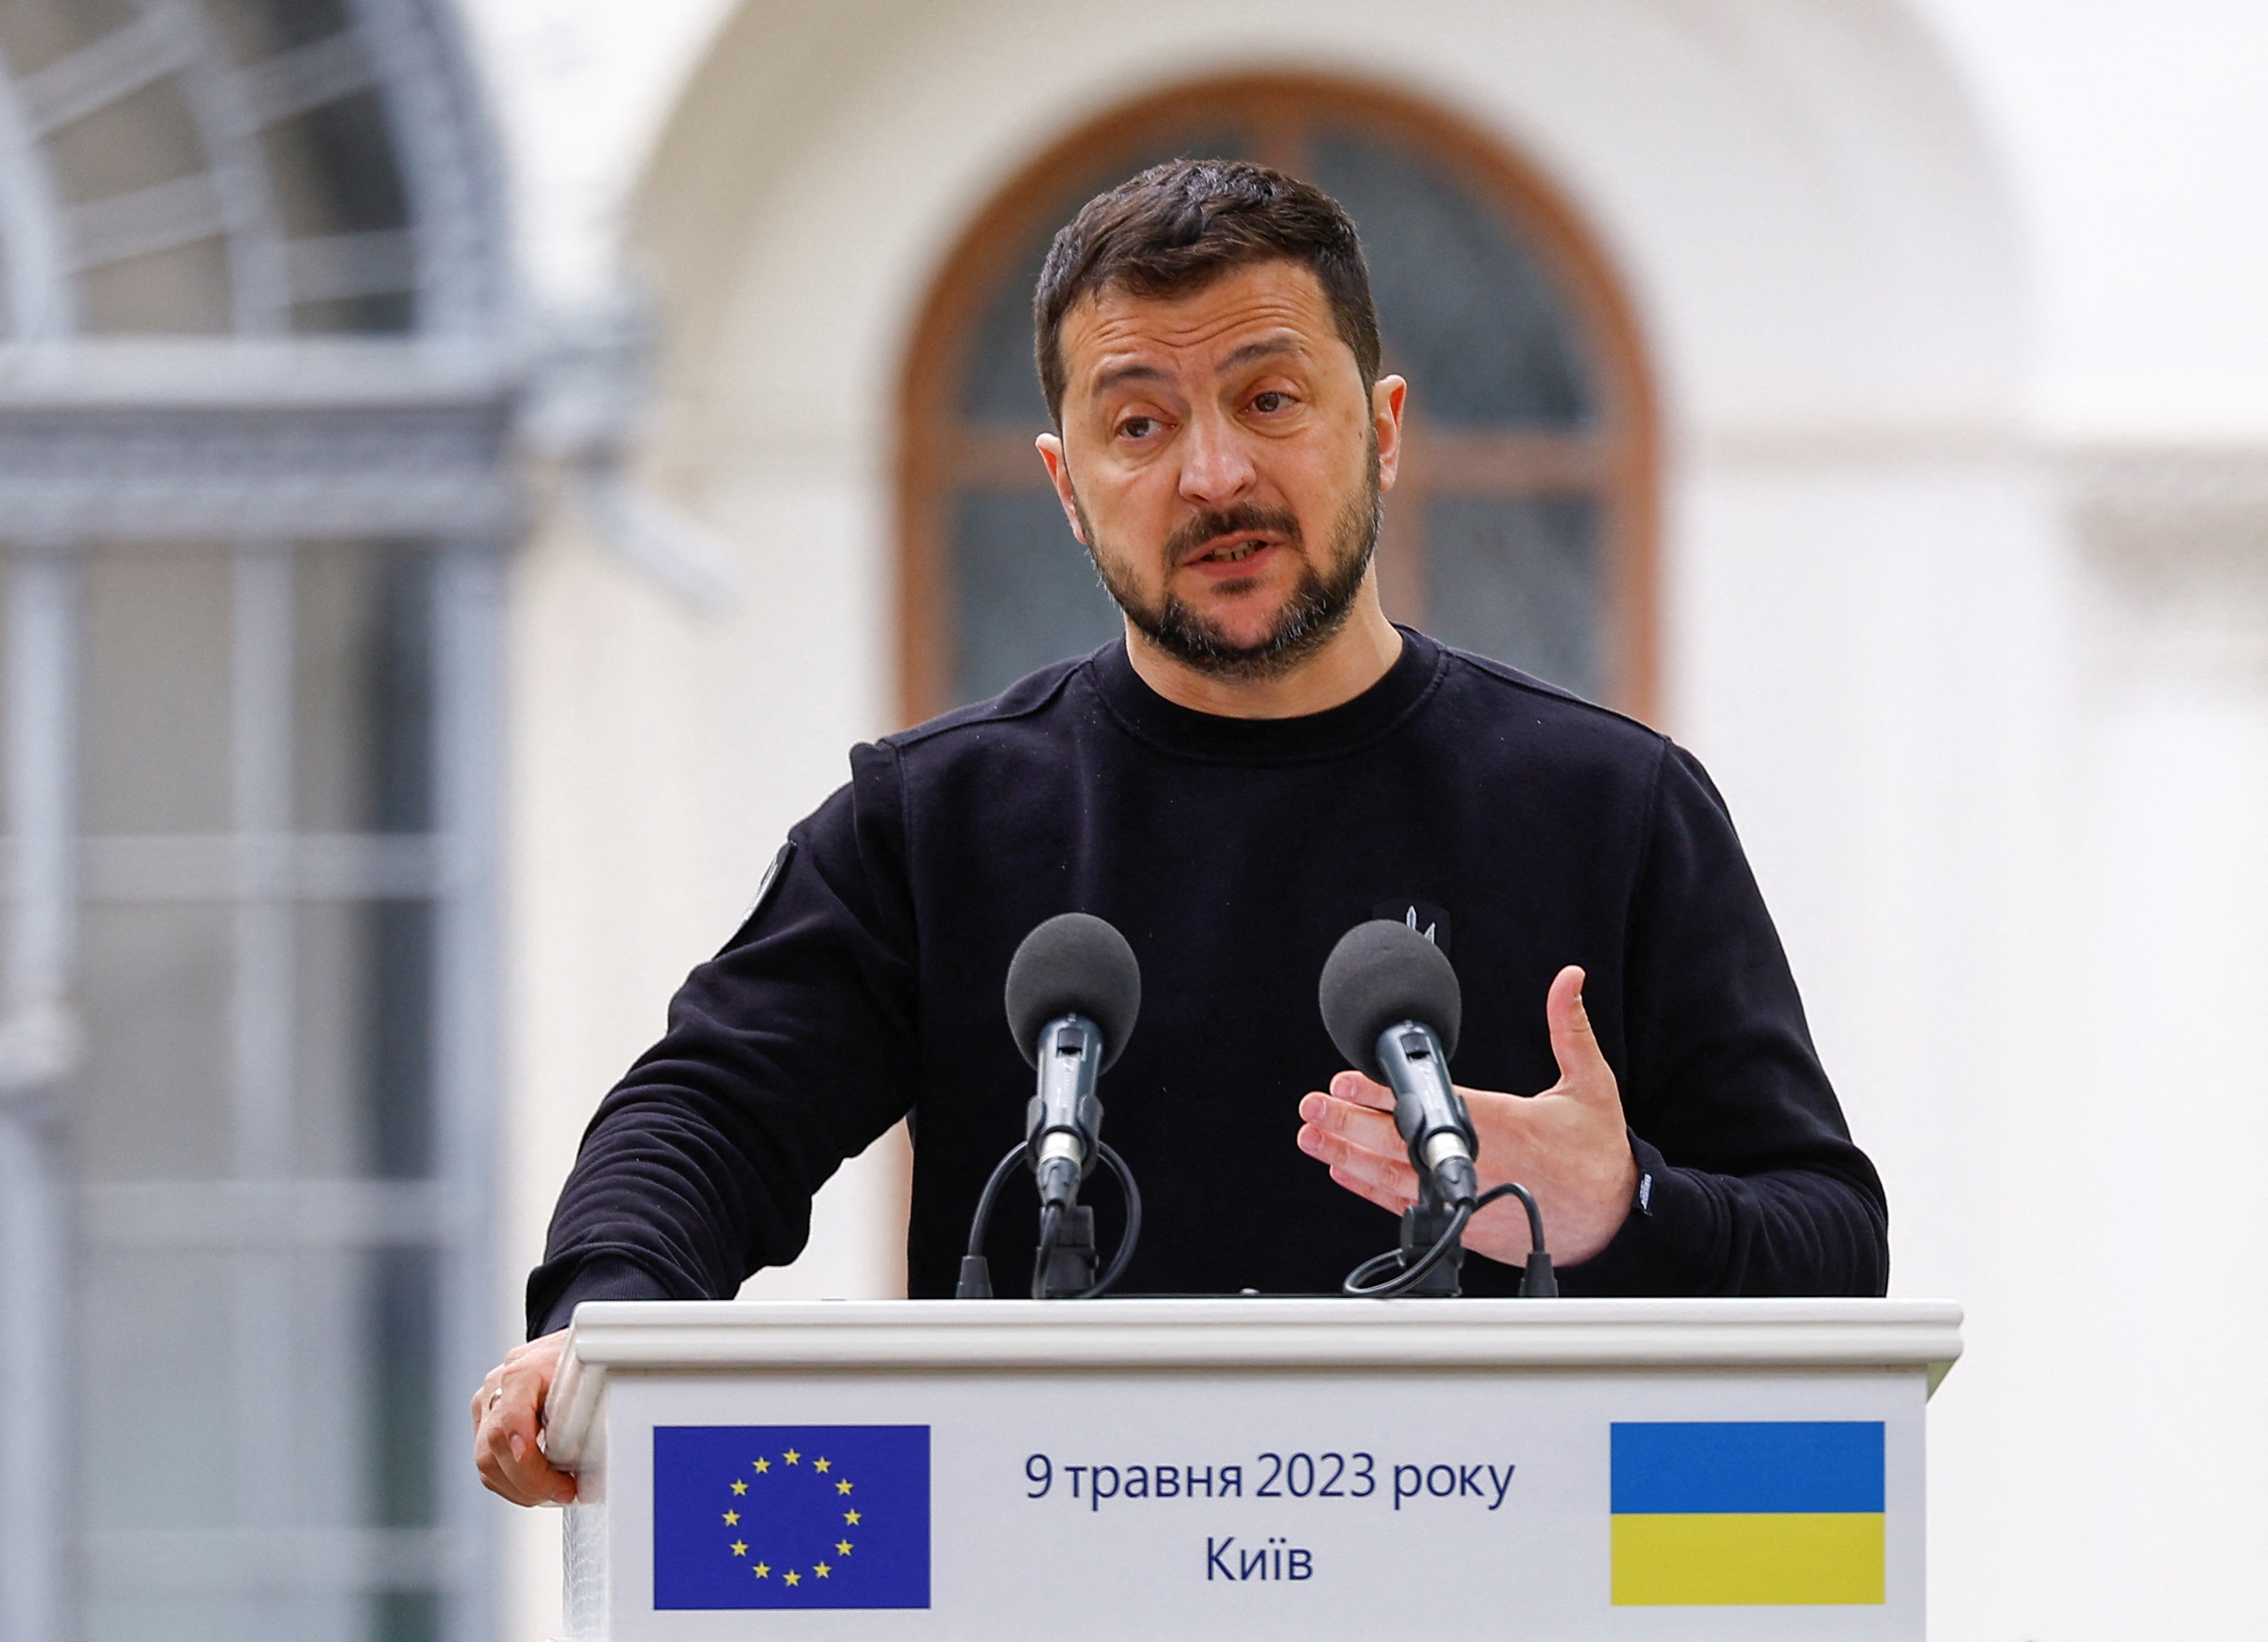 Zelenskyy says armored vehicles save lives, so he will wait for them to arrive. /Valentyn Ogirenko/Reuters